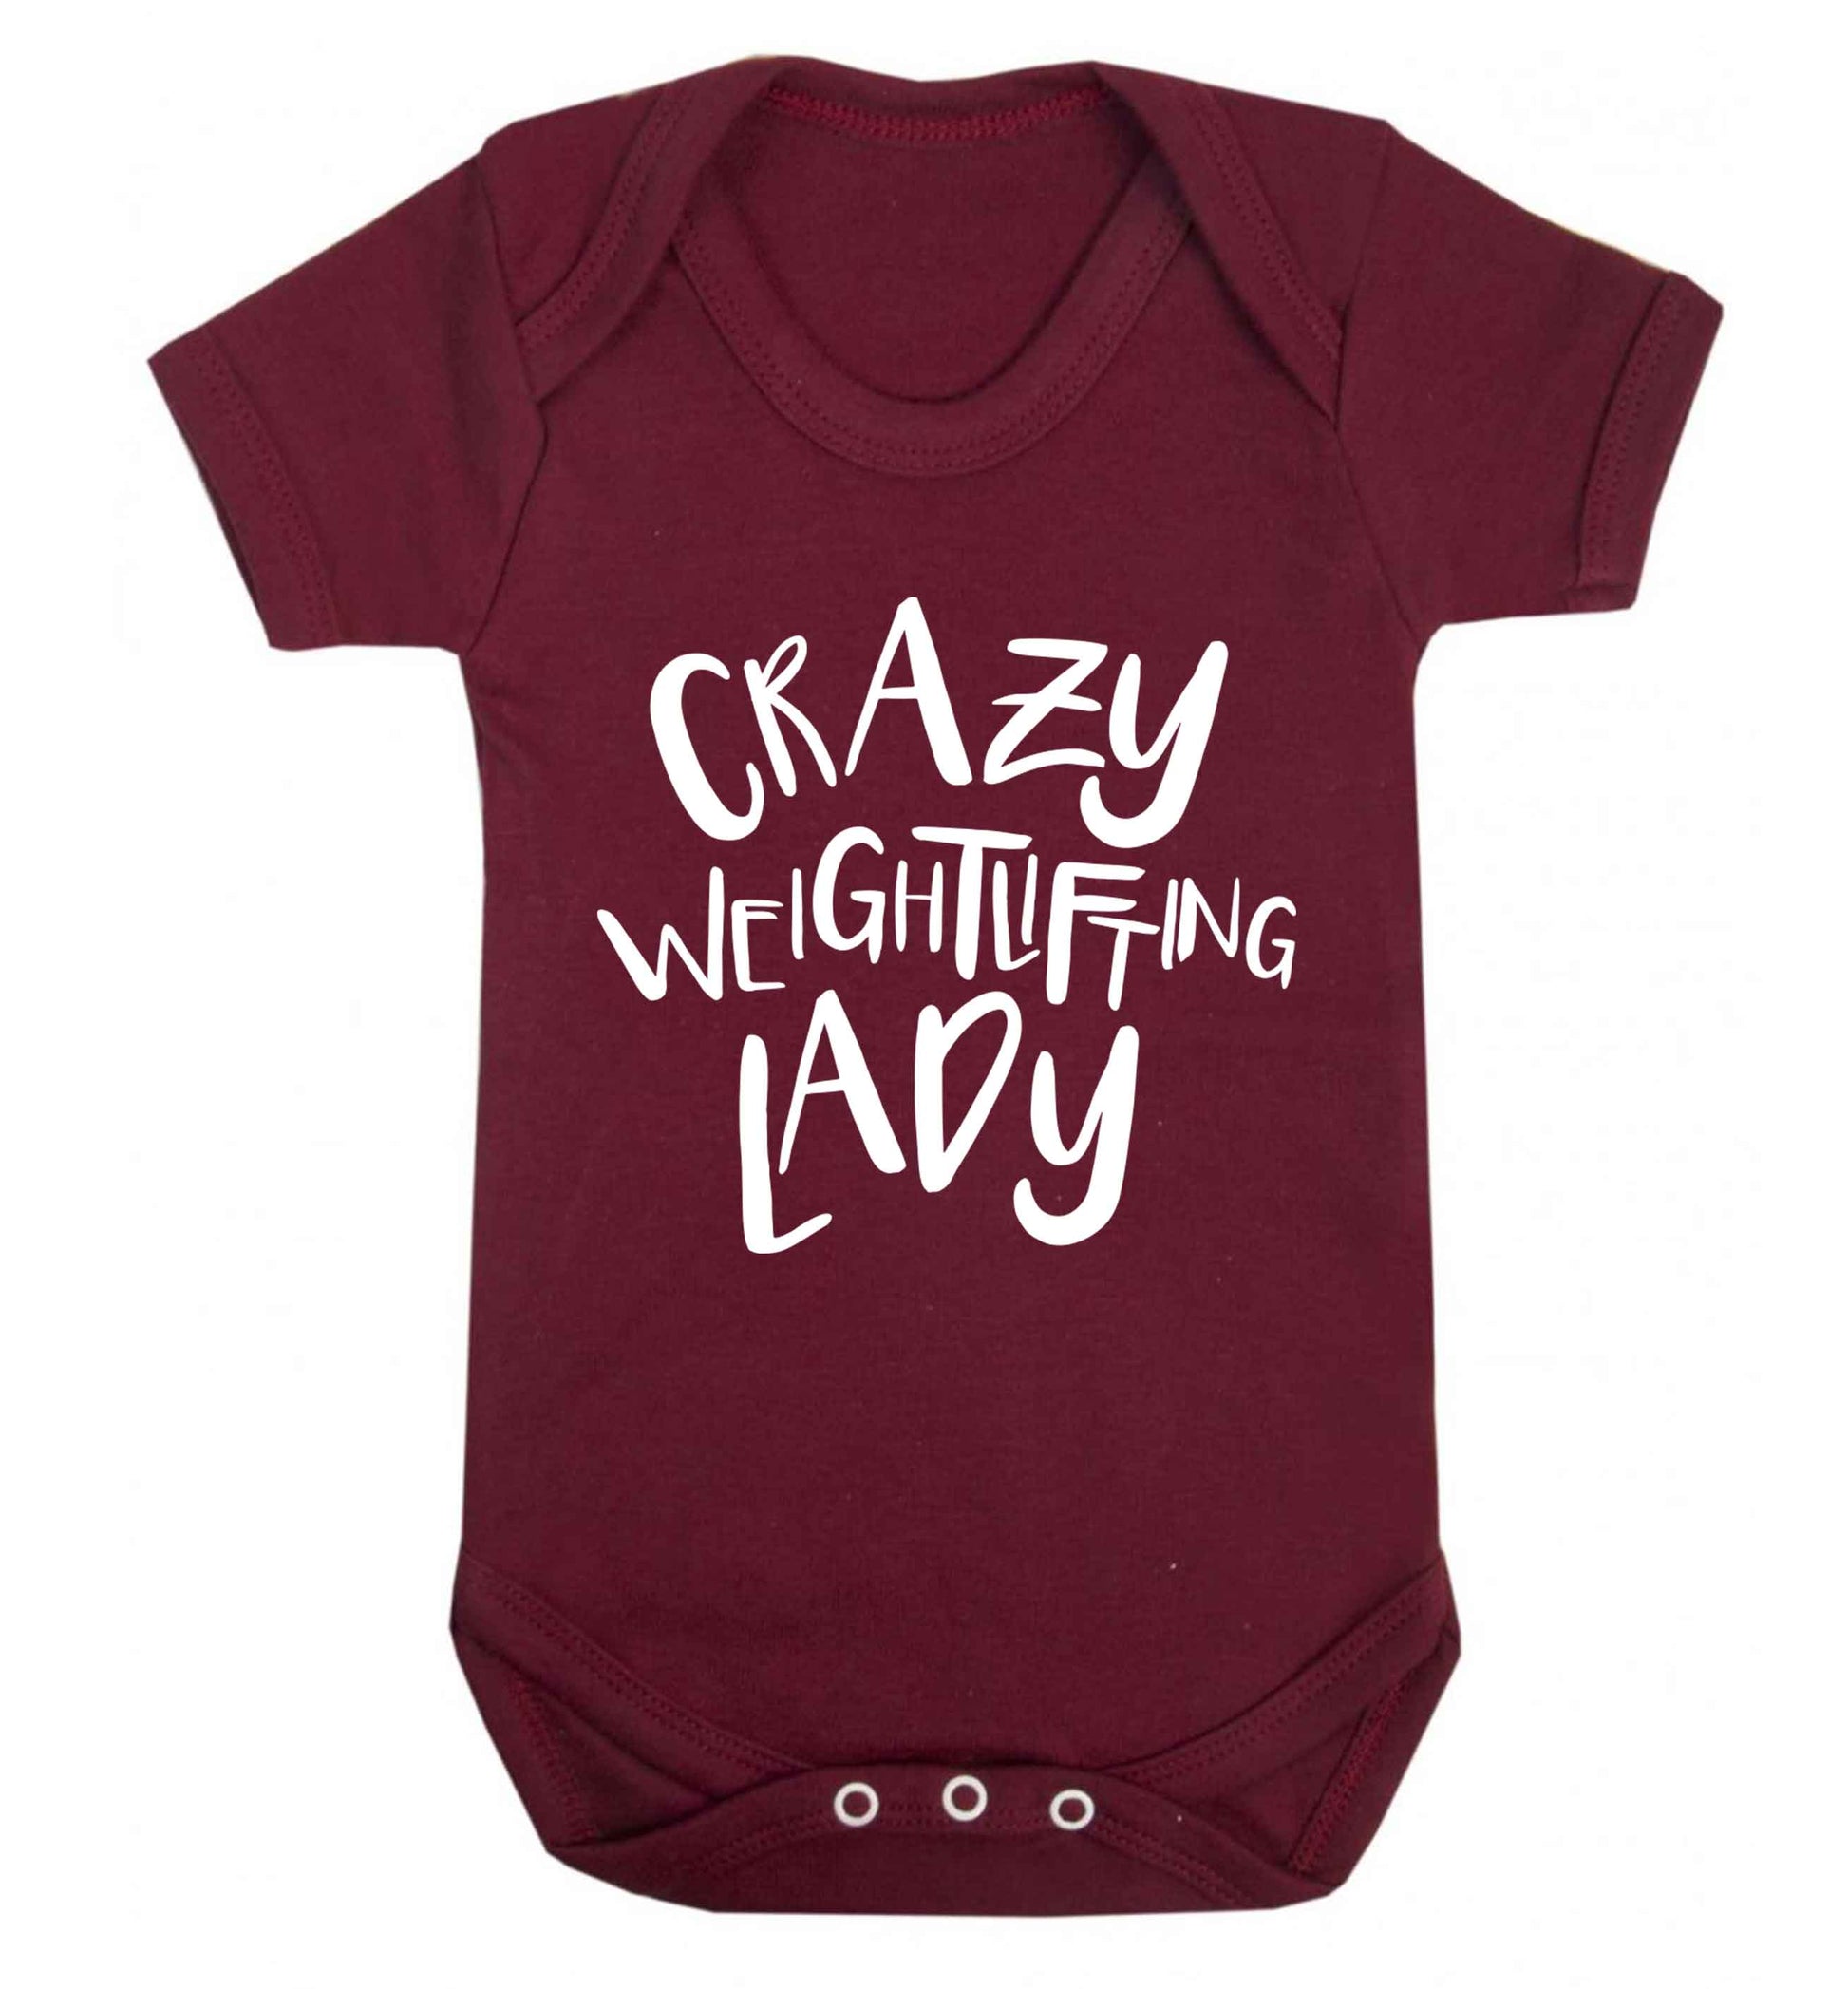 Crazy weightlifting lady Baby Vest maroon 18-24 months